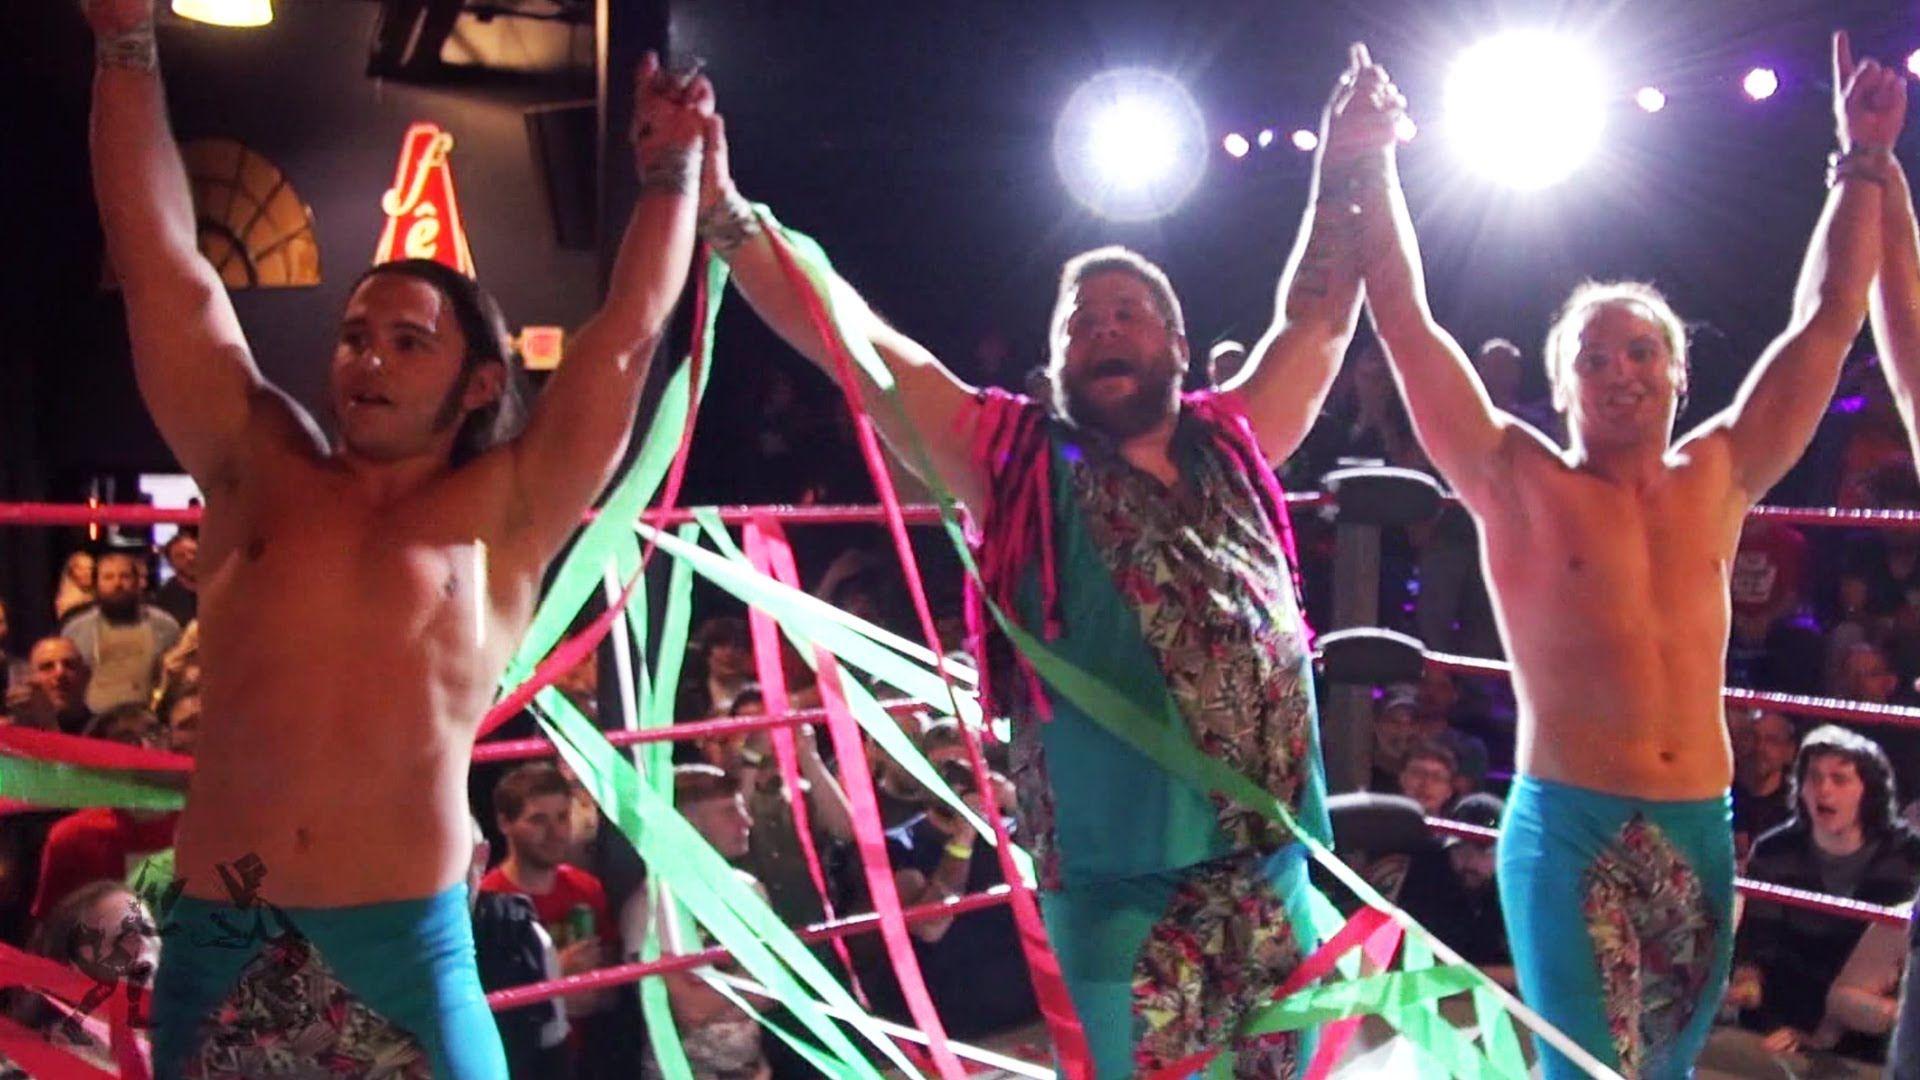 Promo Young Bucks Will Face Juicy Product at Beyond Wrestling